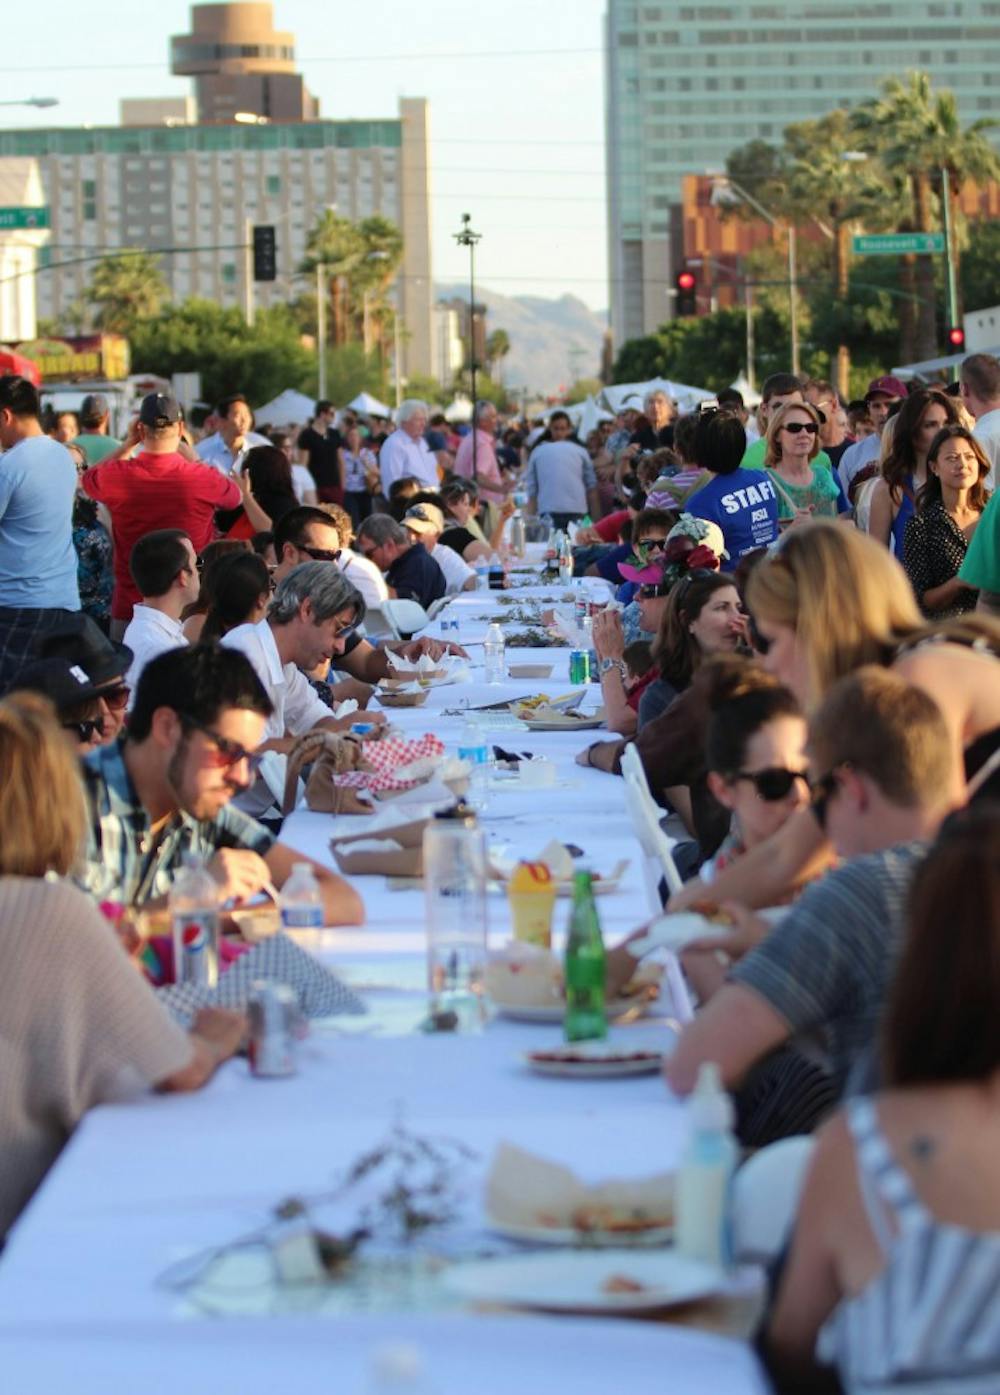 Phoenicians sit down to eat at Feast on the Street. Downtown Phoenix's feast on the street featured a mile and a half long table that stretched from Margaret T. Hance Park to ASU's downtown phoenix campus. (Photo by Dominic Valente)